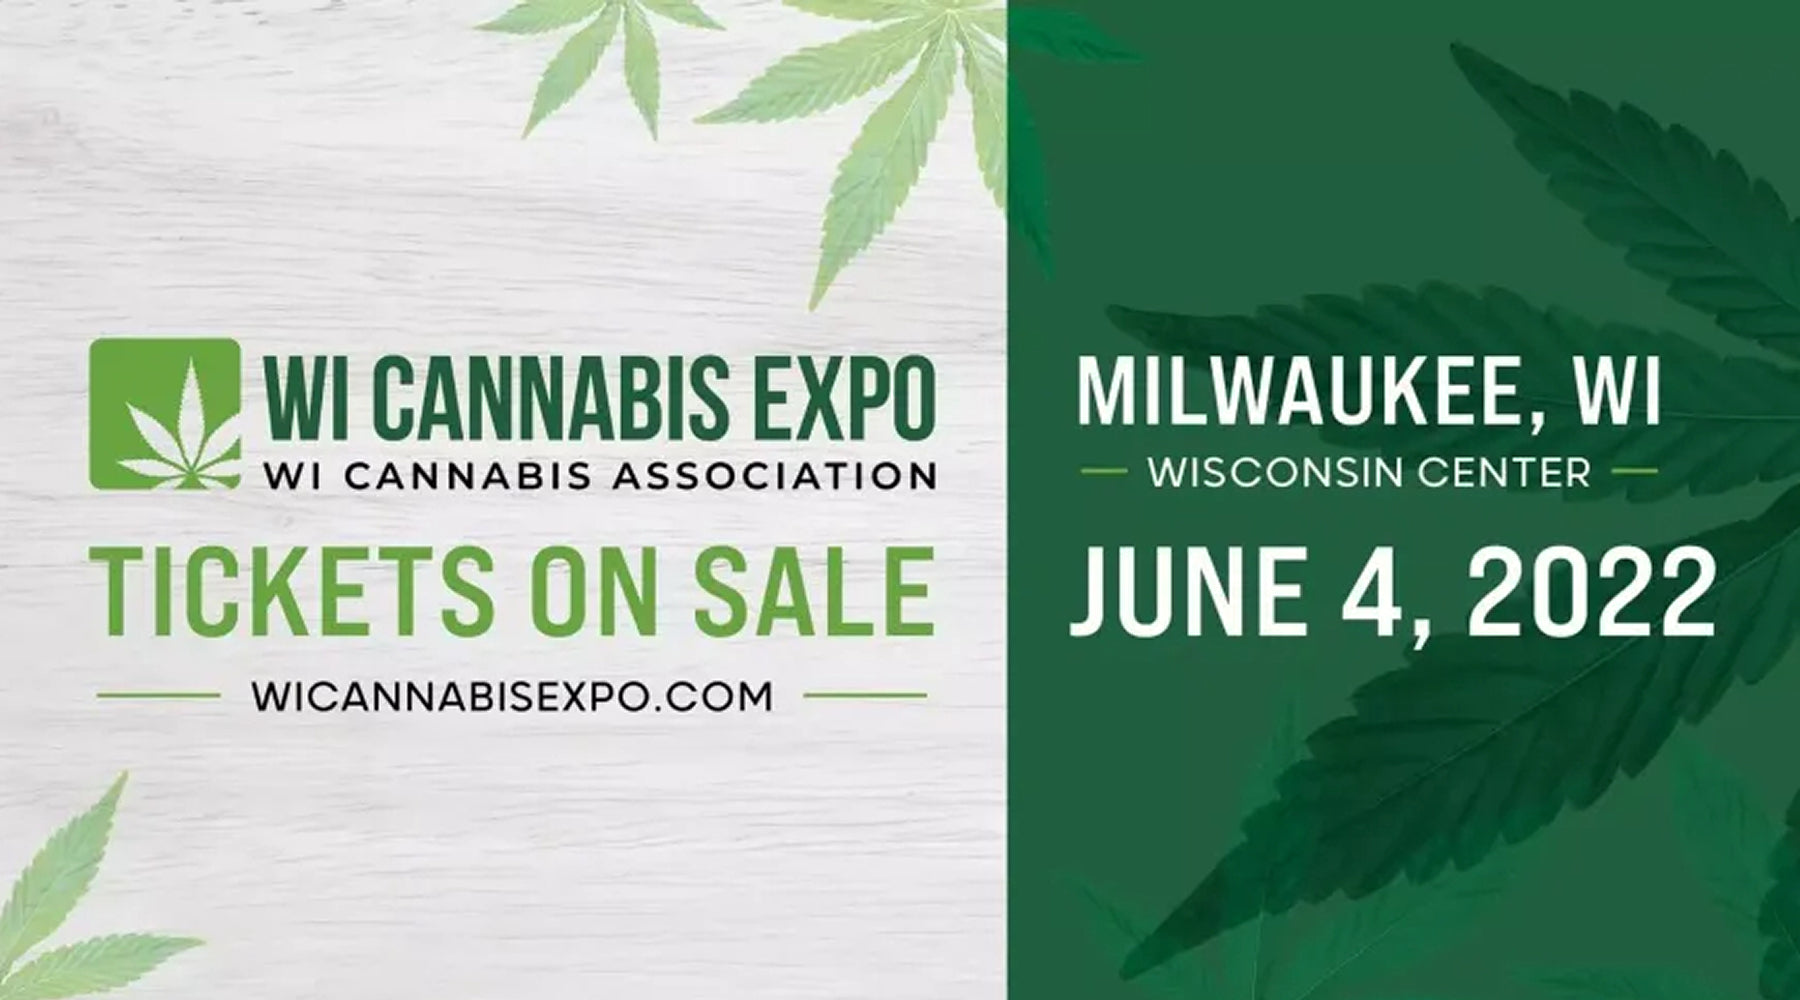 Enjoy Buy One, Get One 50% In Person at the WI Cannabis Expo!